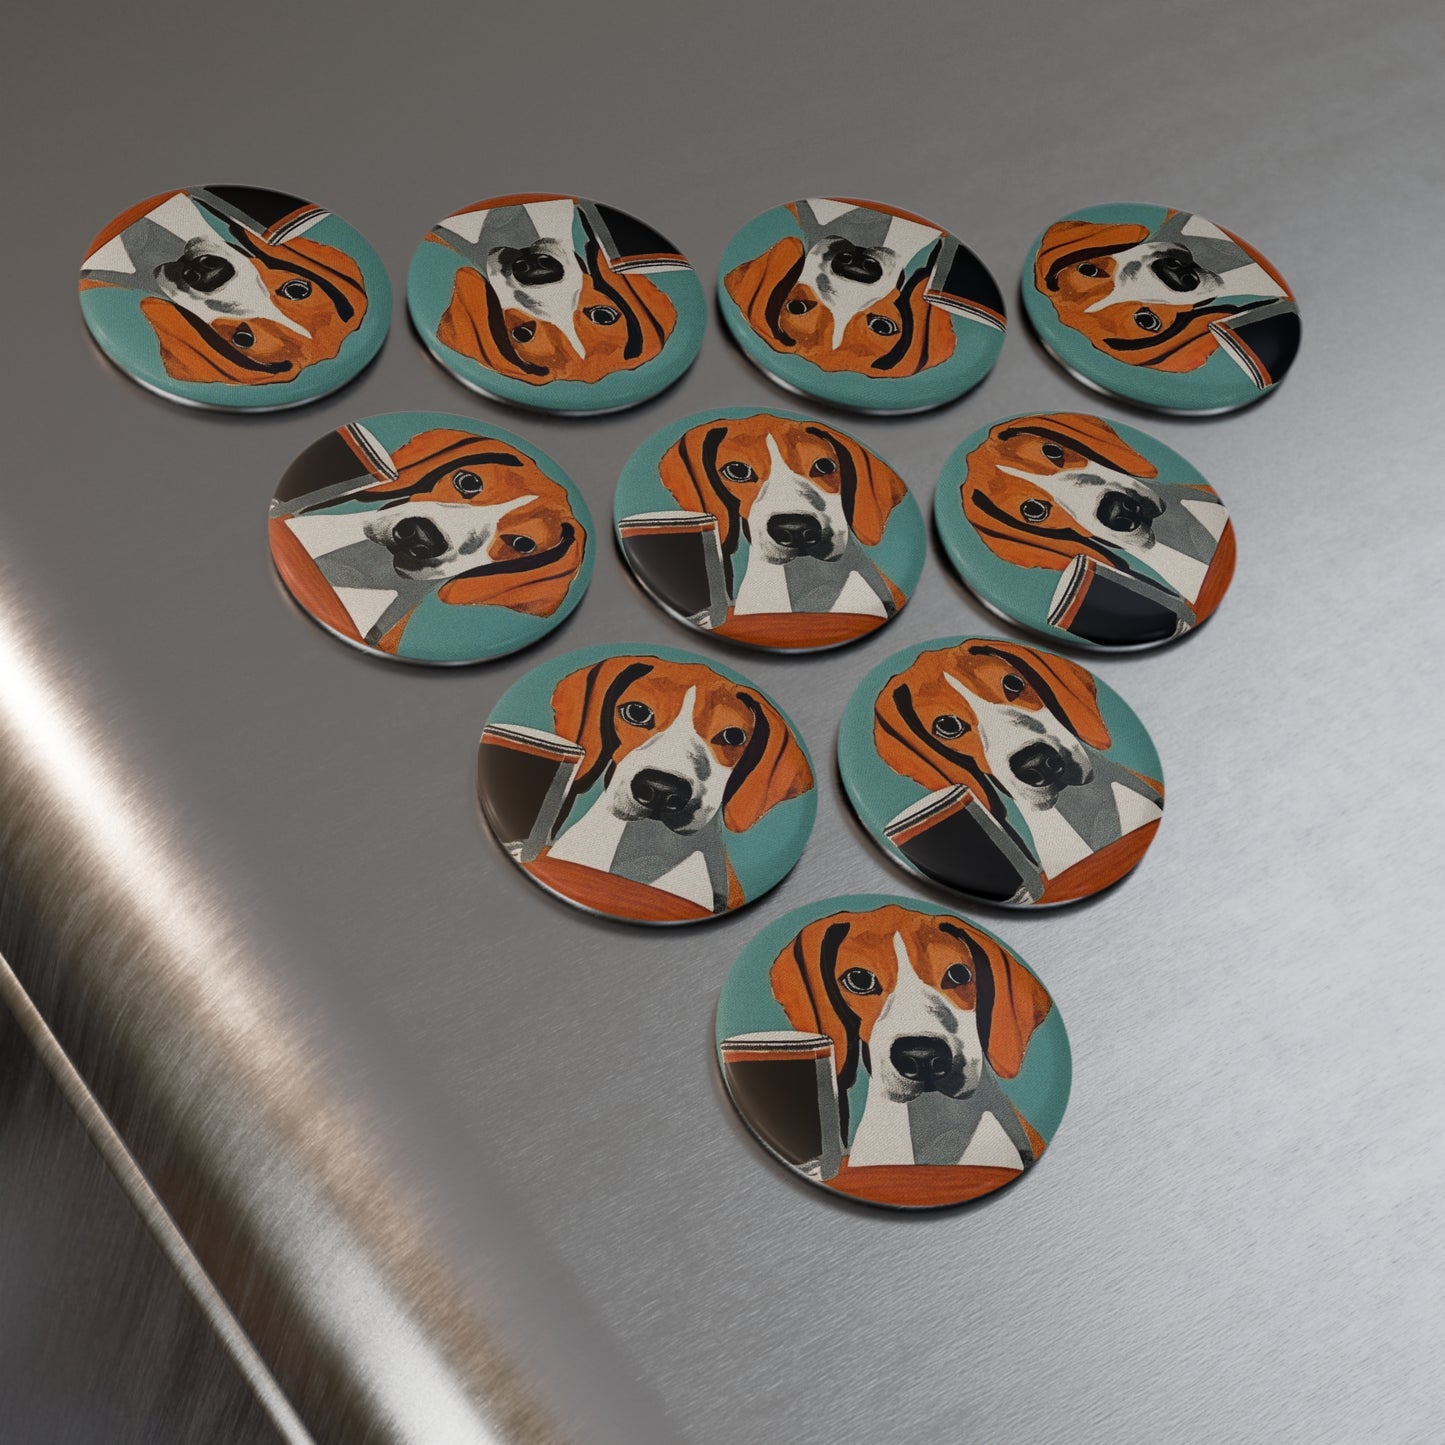 Collectable AKC Rescue Beagle Magnet